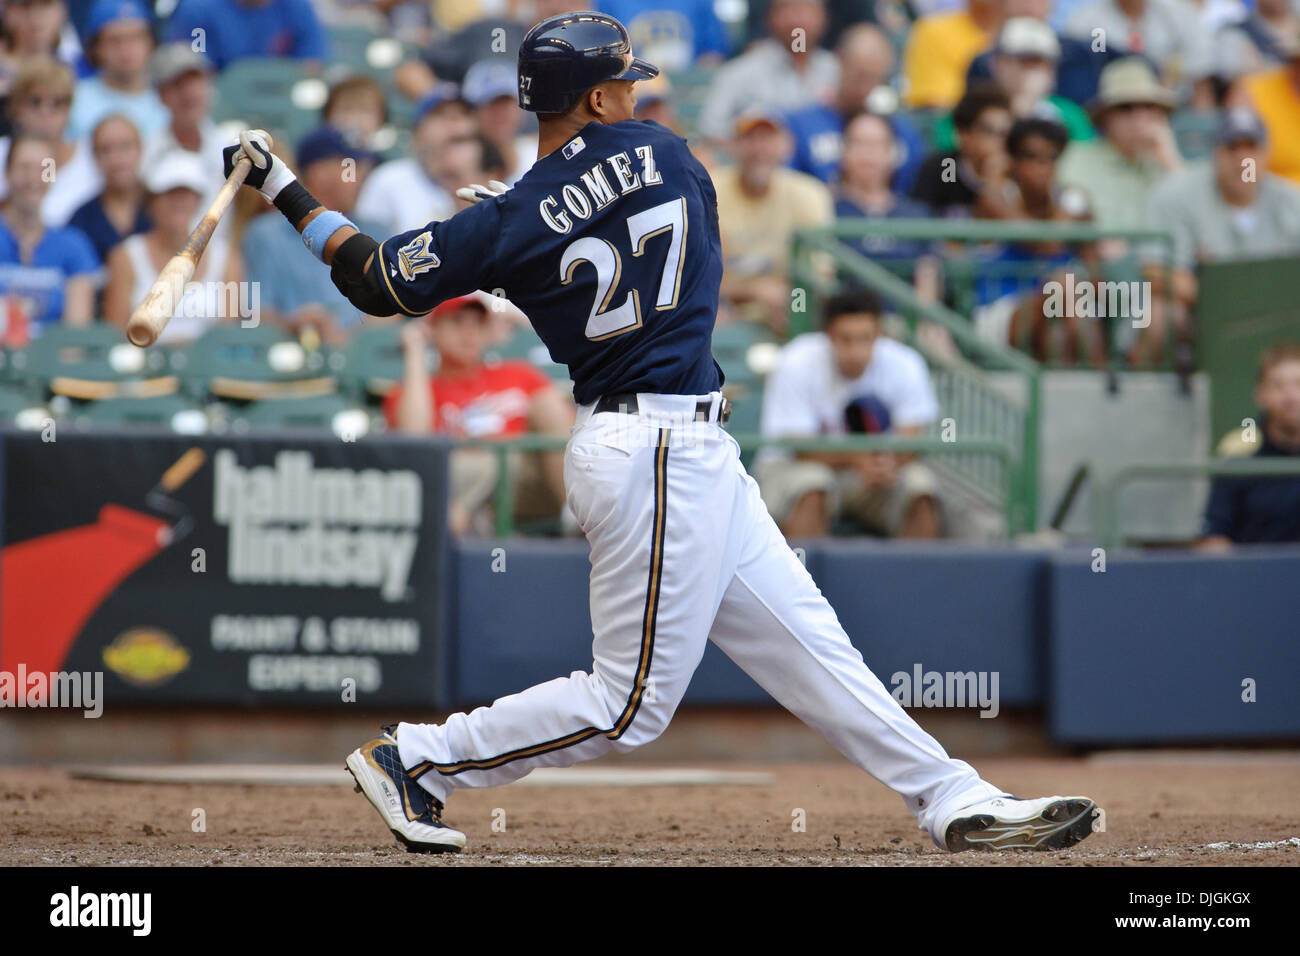 Milwaukee Brewers center fielder Carlos Gomez (27) during the game between  the Milwaukee Brewers and Chicago Cubs at Miller Park in Milwaukee,  Wisconsin. The Cubs defeated the Brewers 8-1. (Credit Image: ©